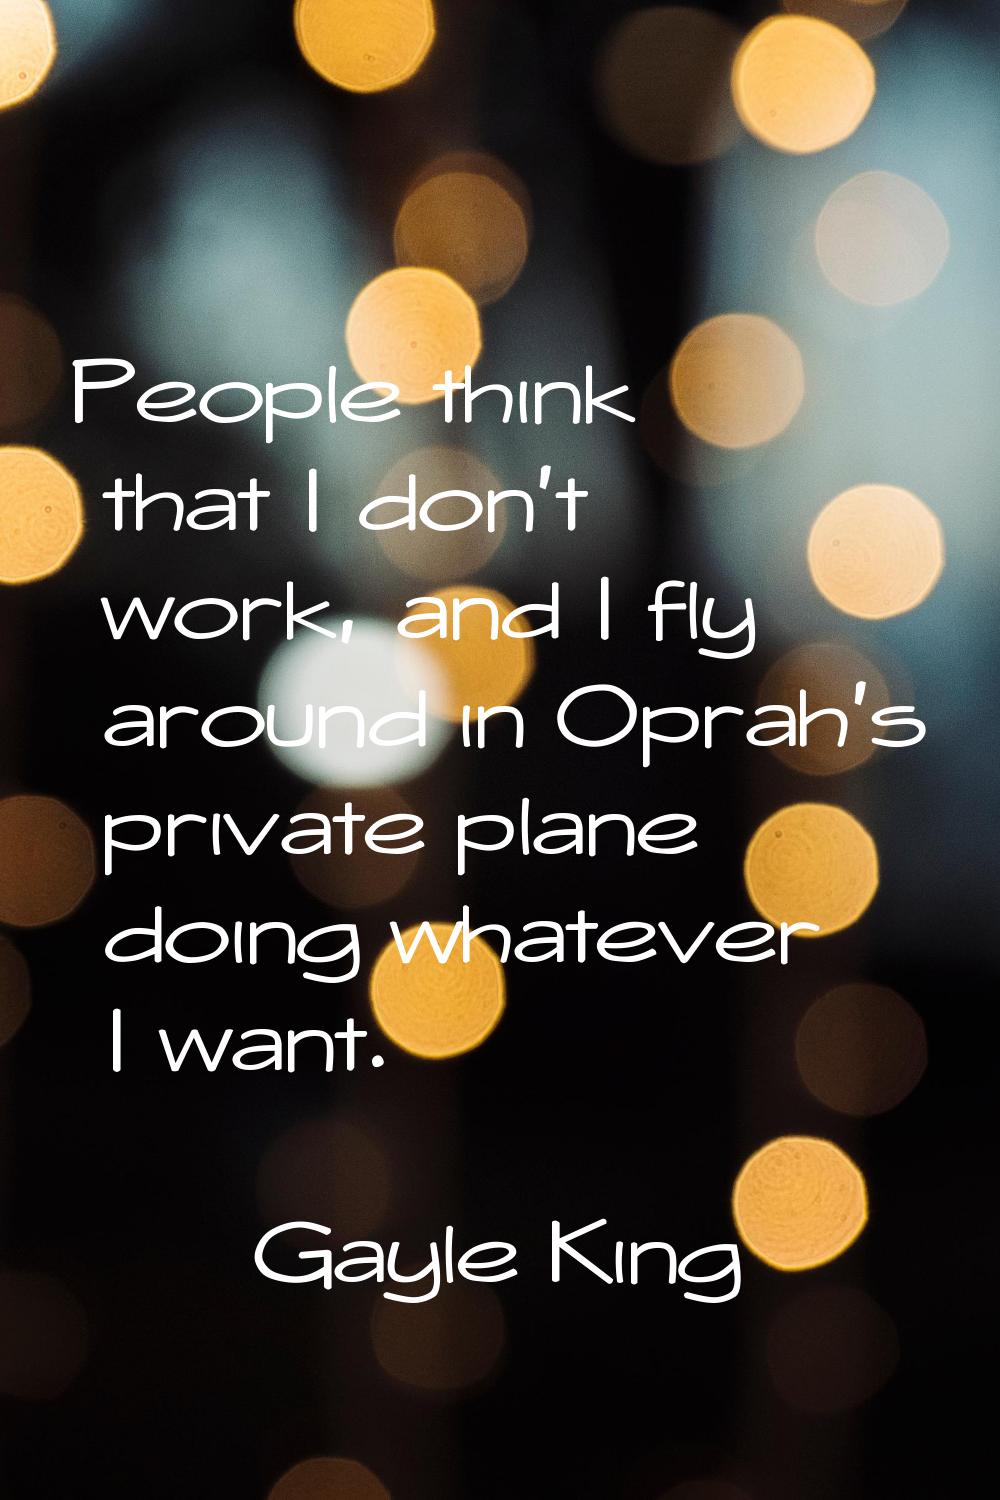 People think that I don't work, and I fly around in Oprah's private plane doing whatever I want.